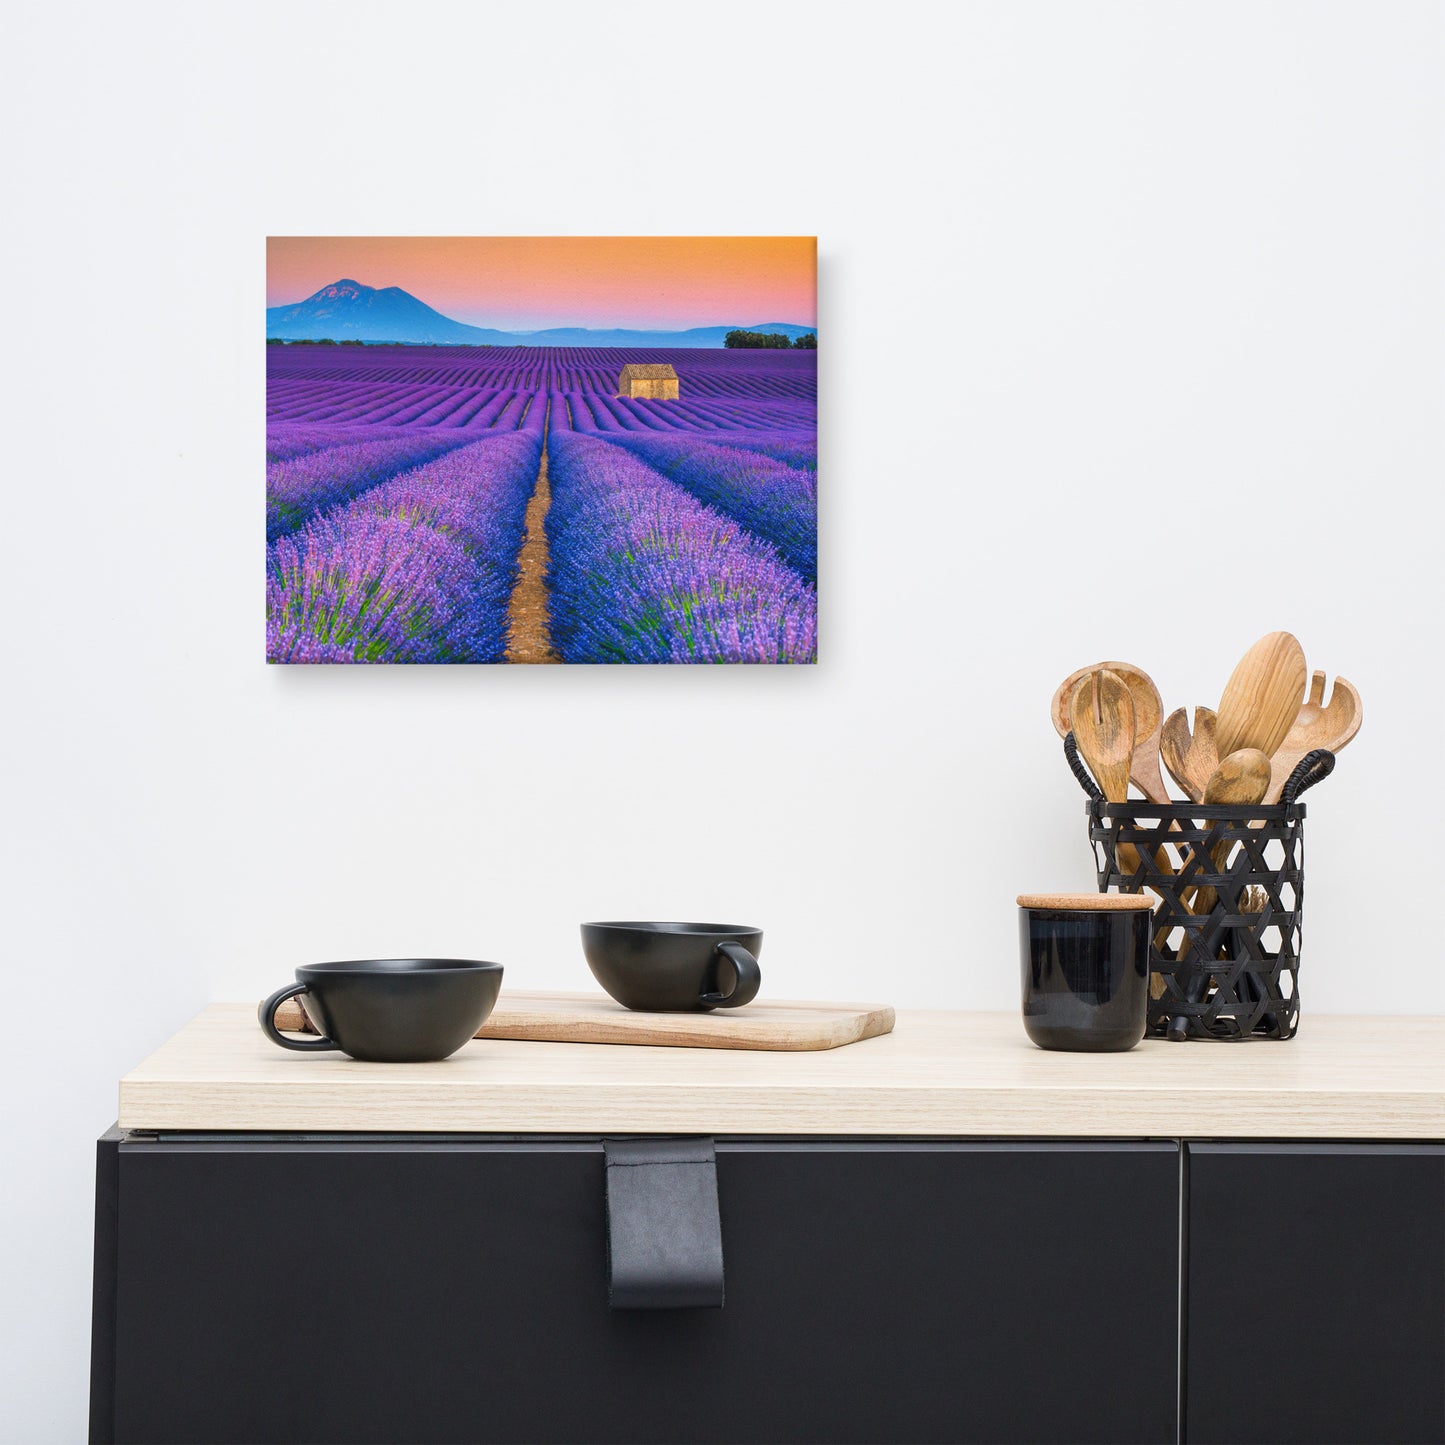 Blooming Lavender Field and Sunset Landscape Photograph Canvas Wall Art Prints